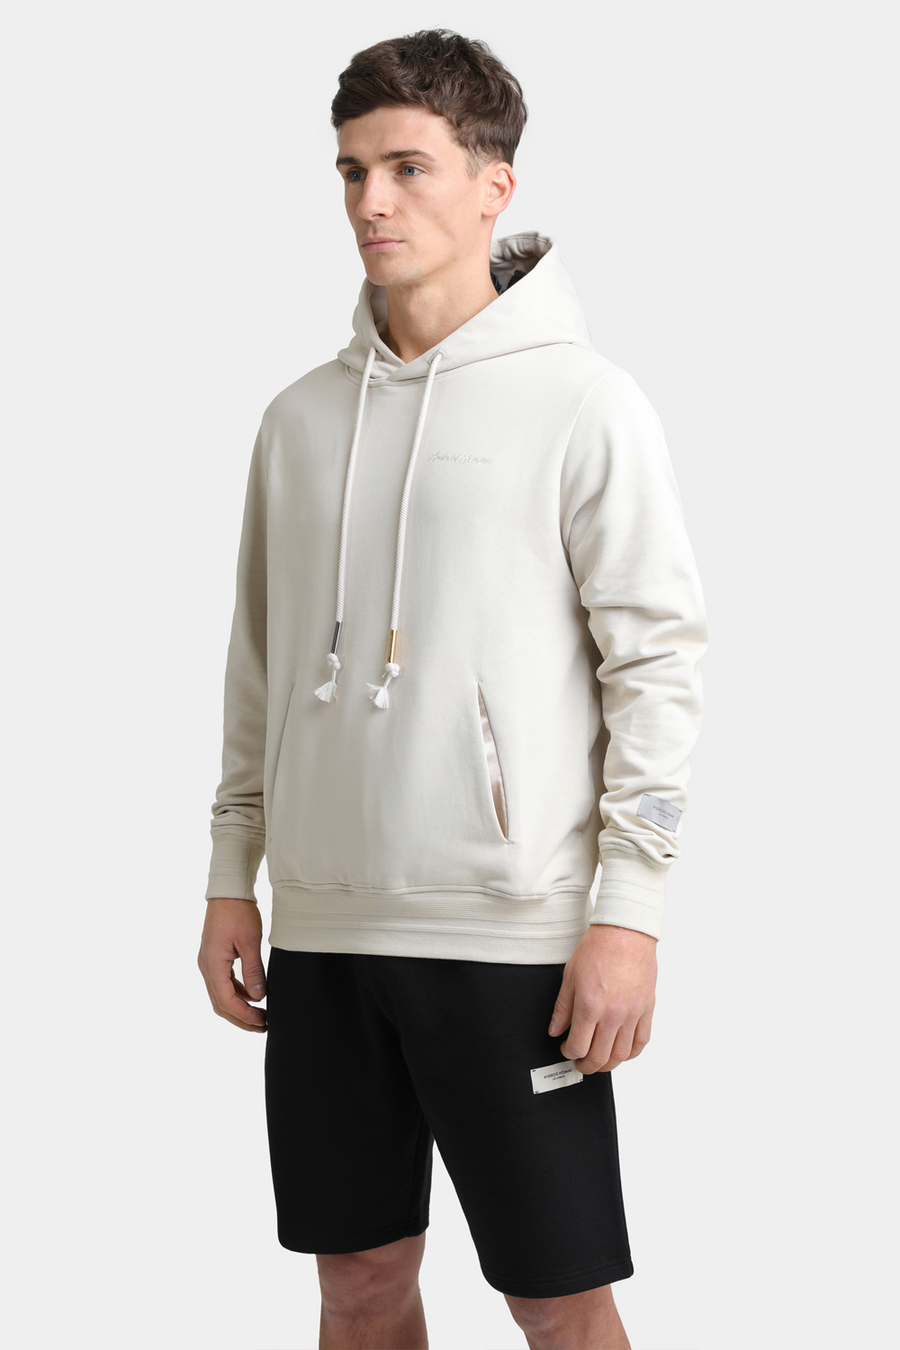 Buy the Android Homme Pocket Hoodie in Sand at Intro. Spend £100 for free UK delivery. Official stockists. We ship worldwide.